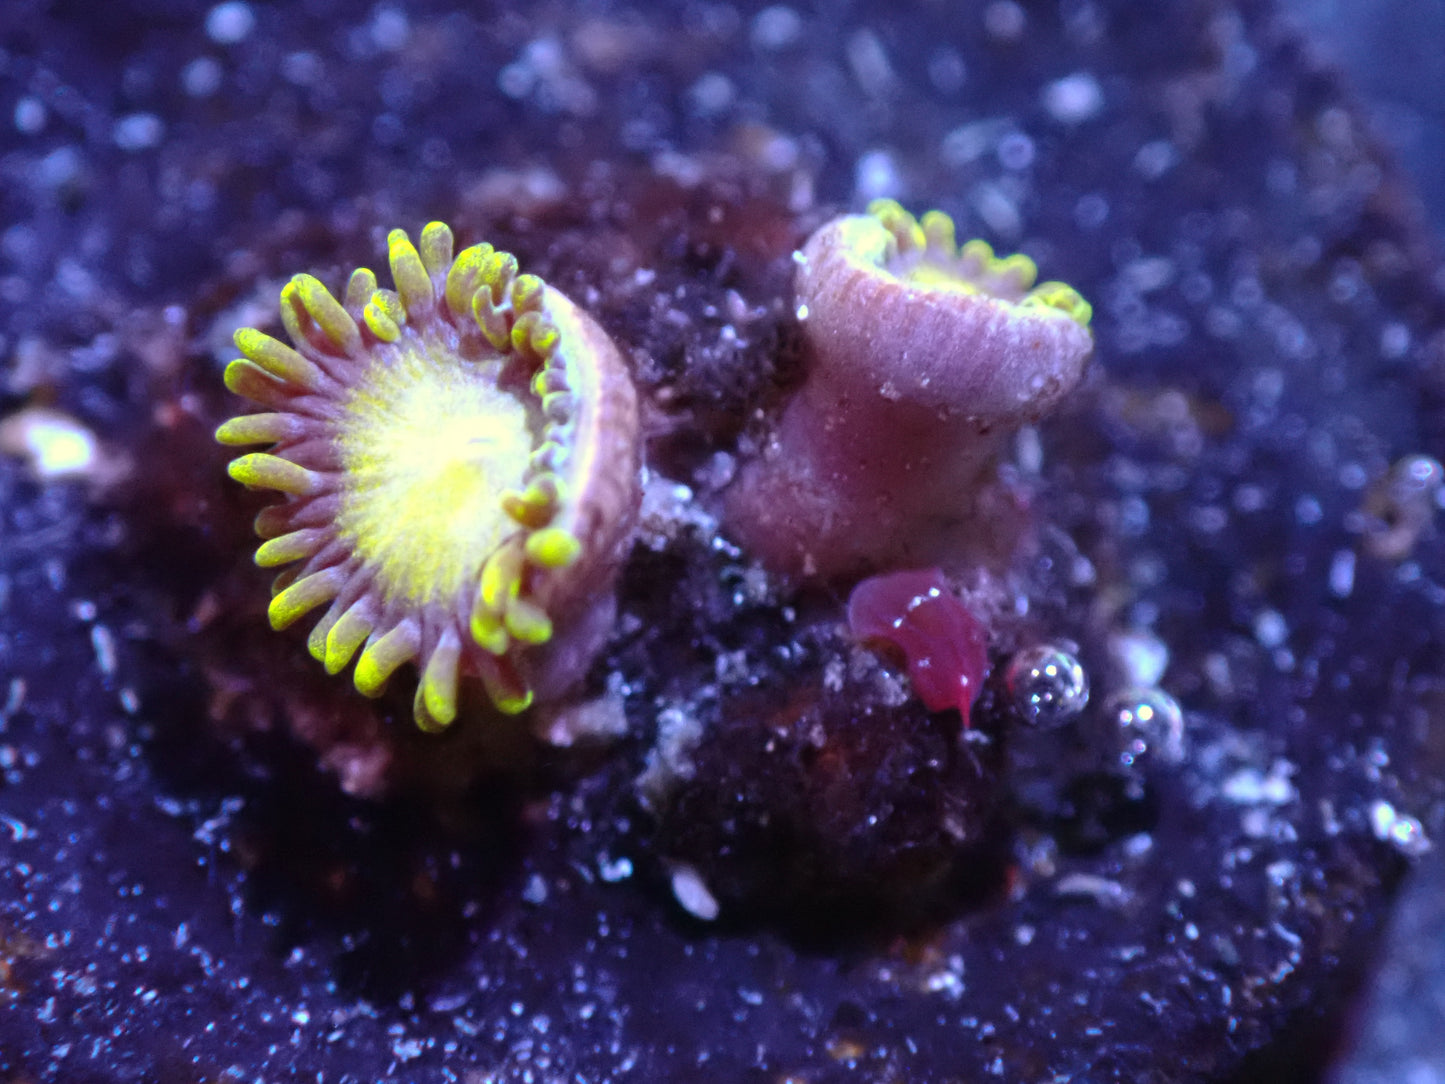 King Mitis Zoas Auctions 8/9 ended